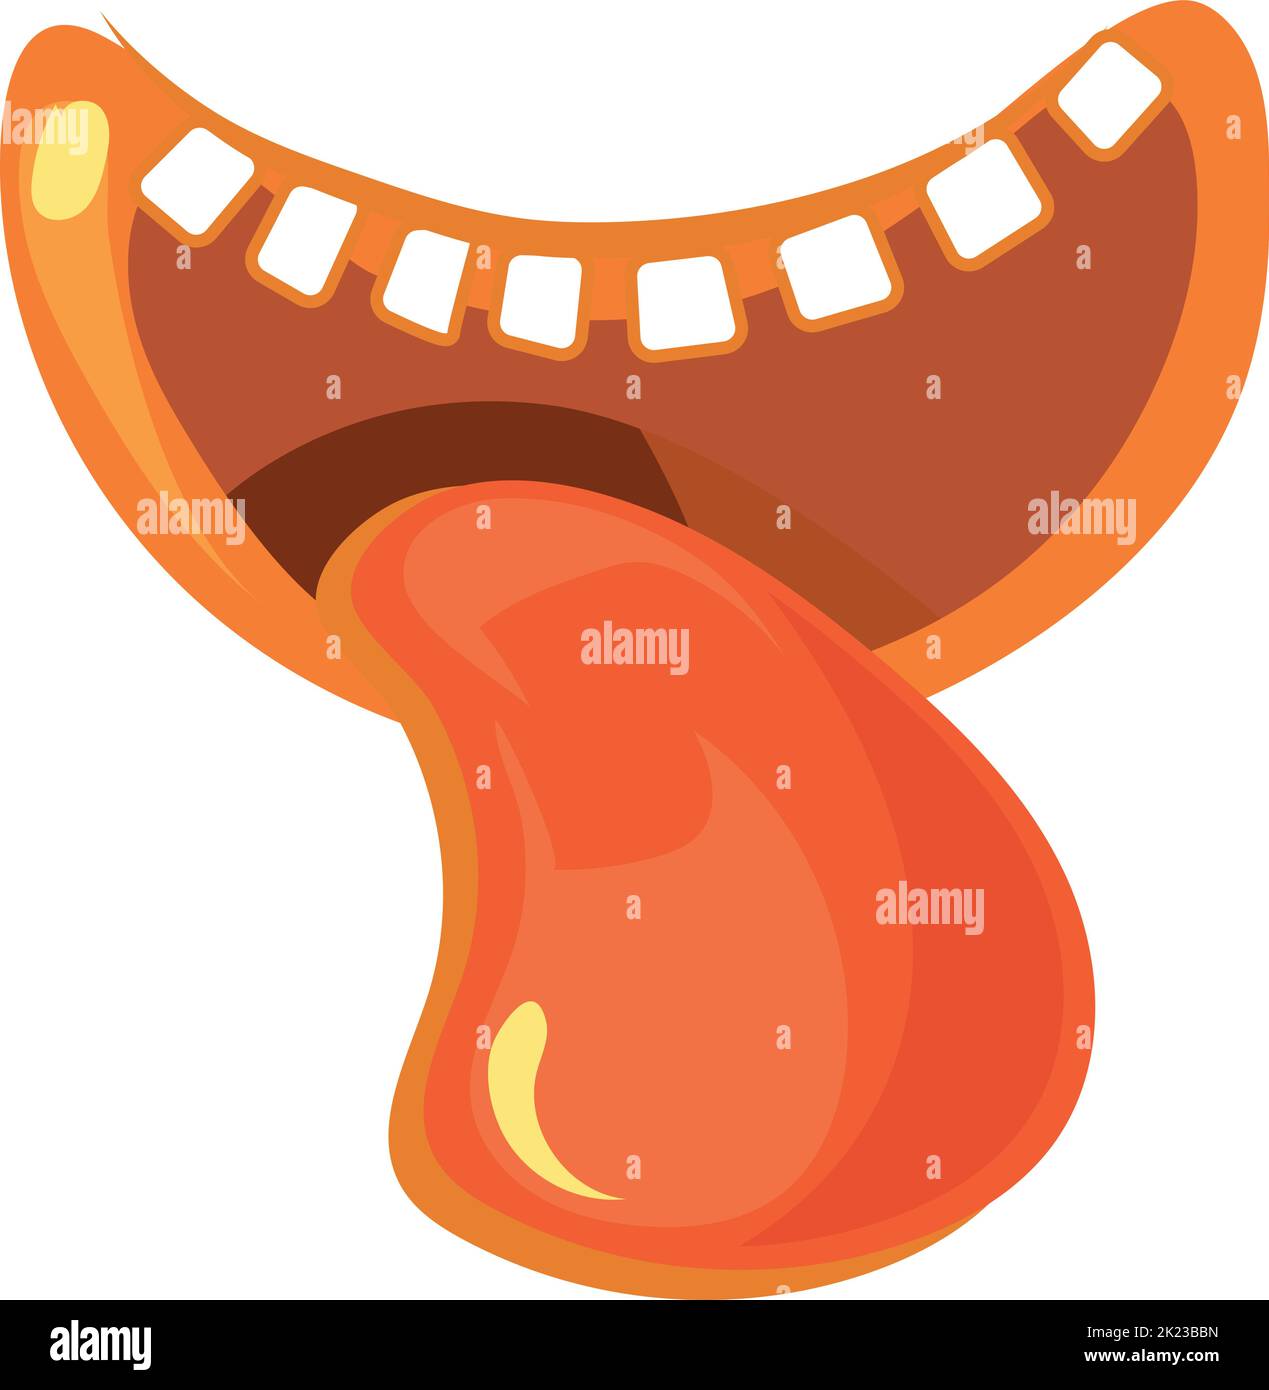 Cartoon mouth with tongue out. Cute monster expression Stock Vector